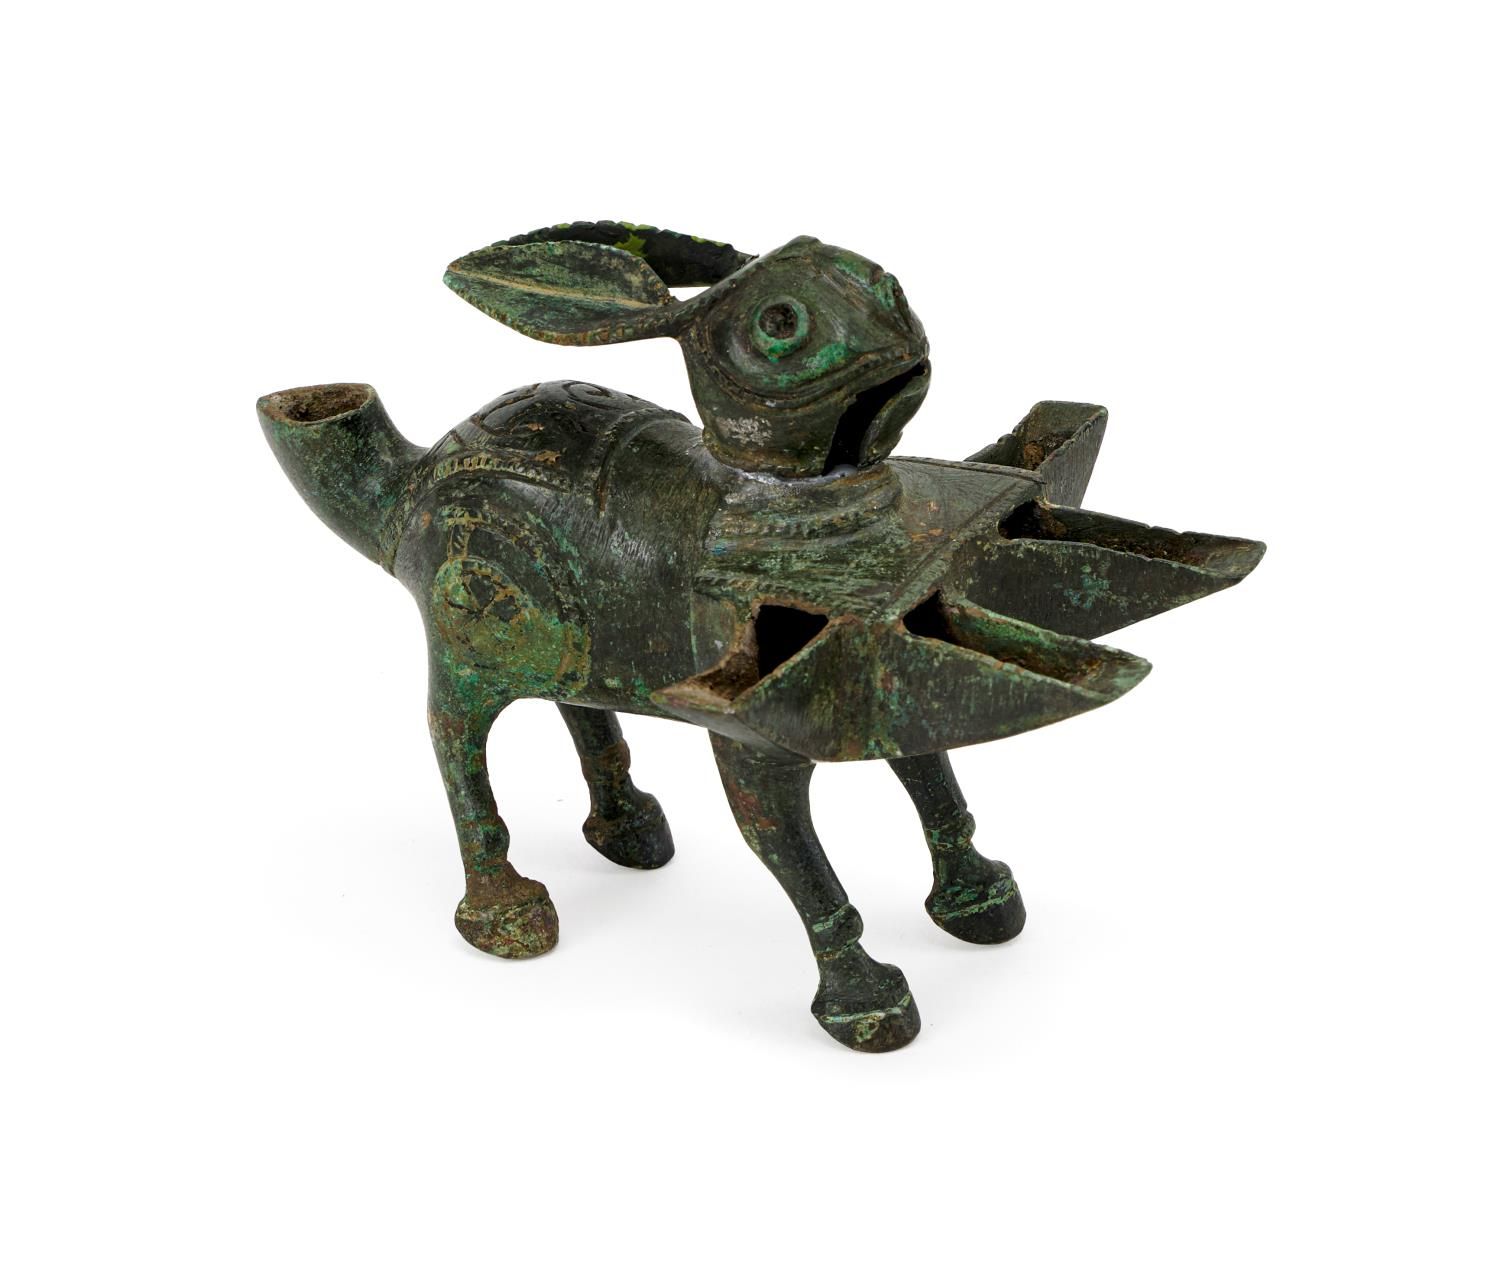 A RARE FATIMID BRONZE INCENSE BURNER IN THE SHAPE OF A HARE, 10TH CENTURY, EGYPT&hellip;